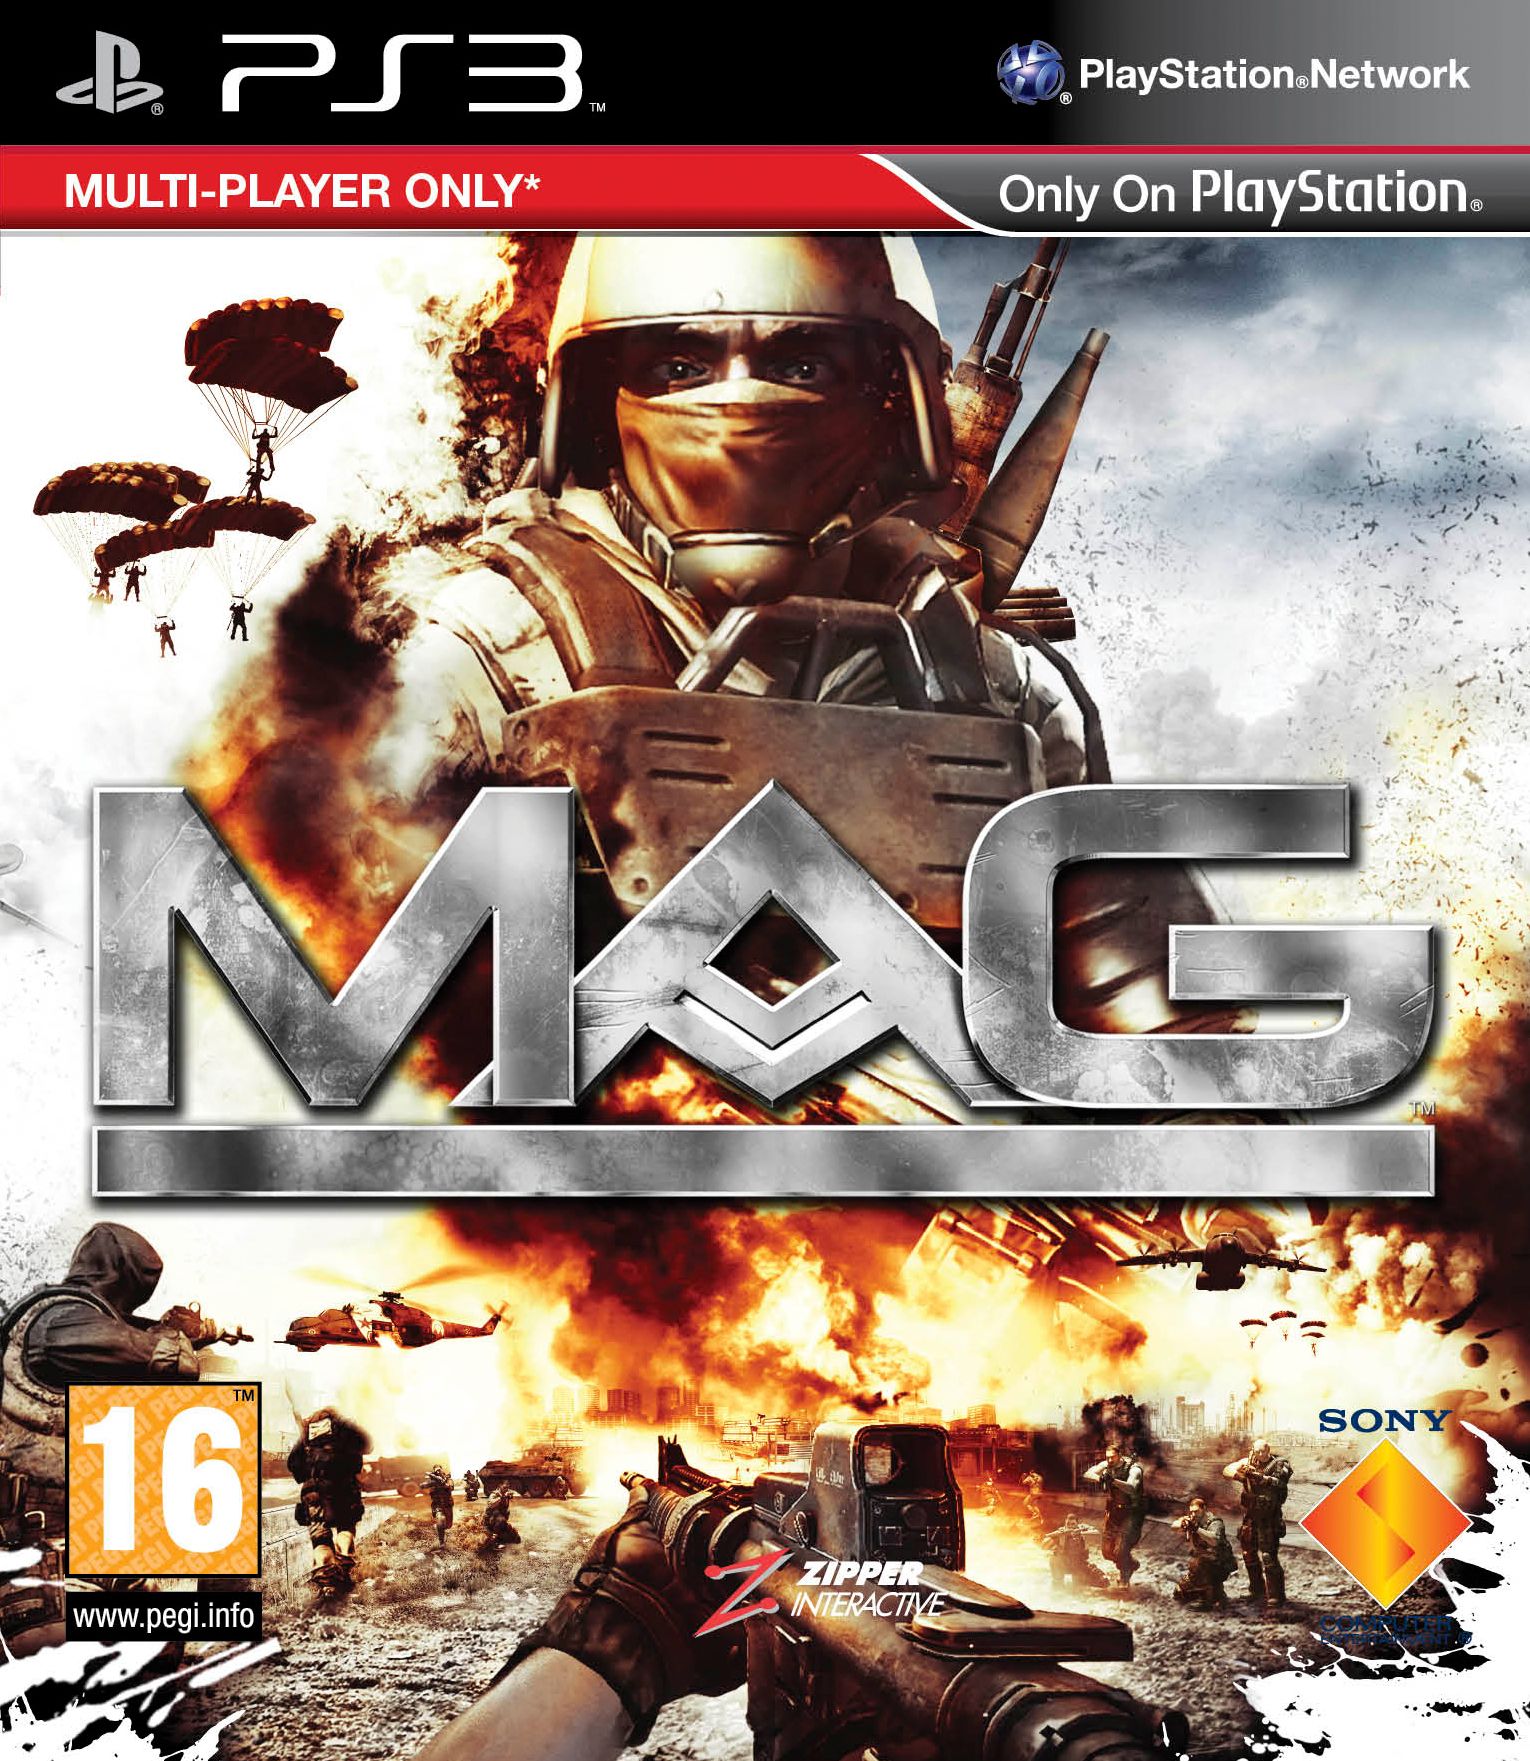 M.A.G. - Massive action game